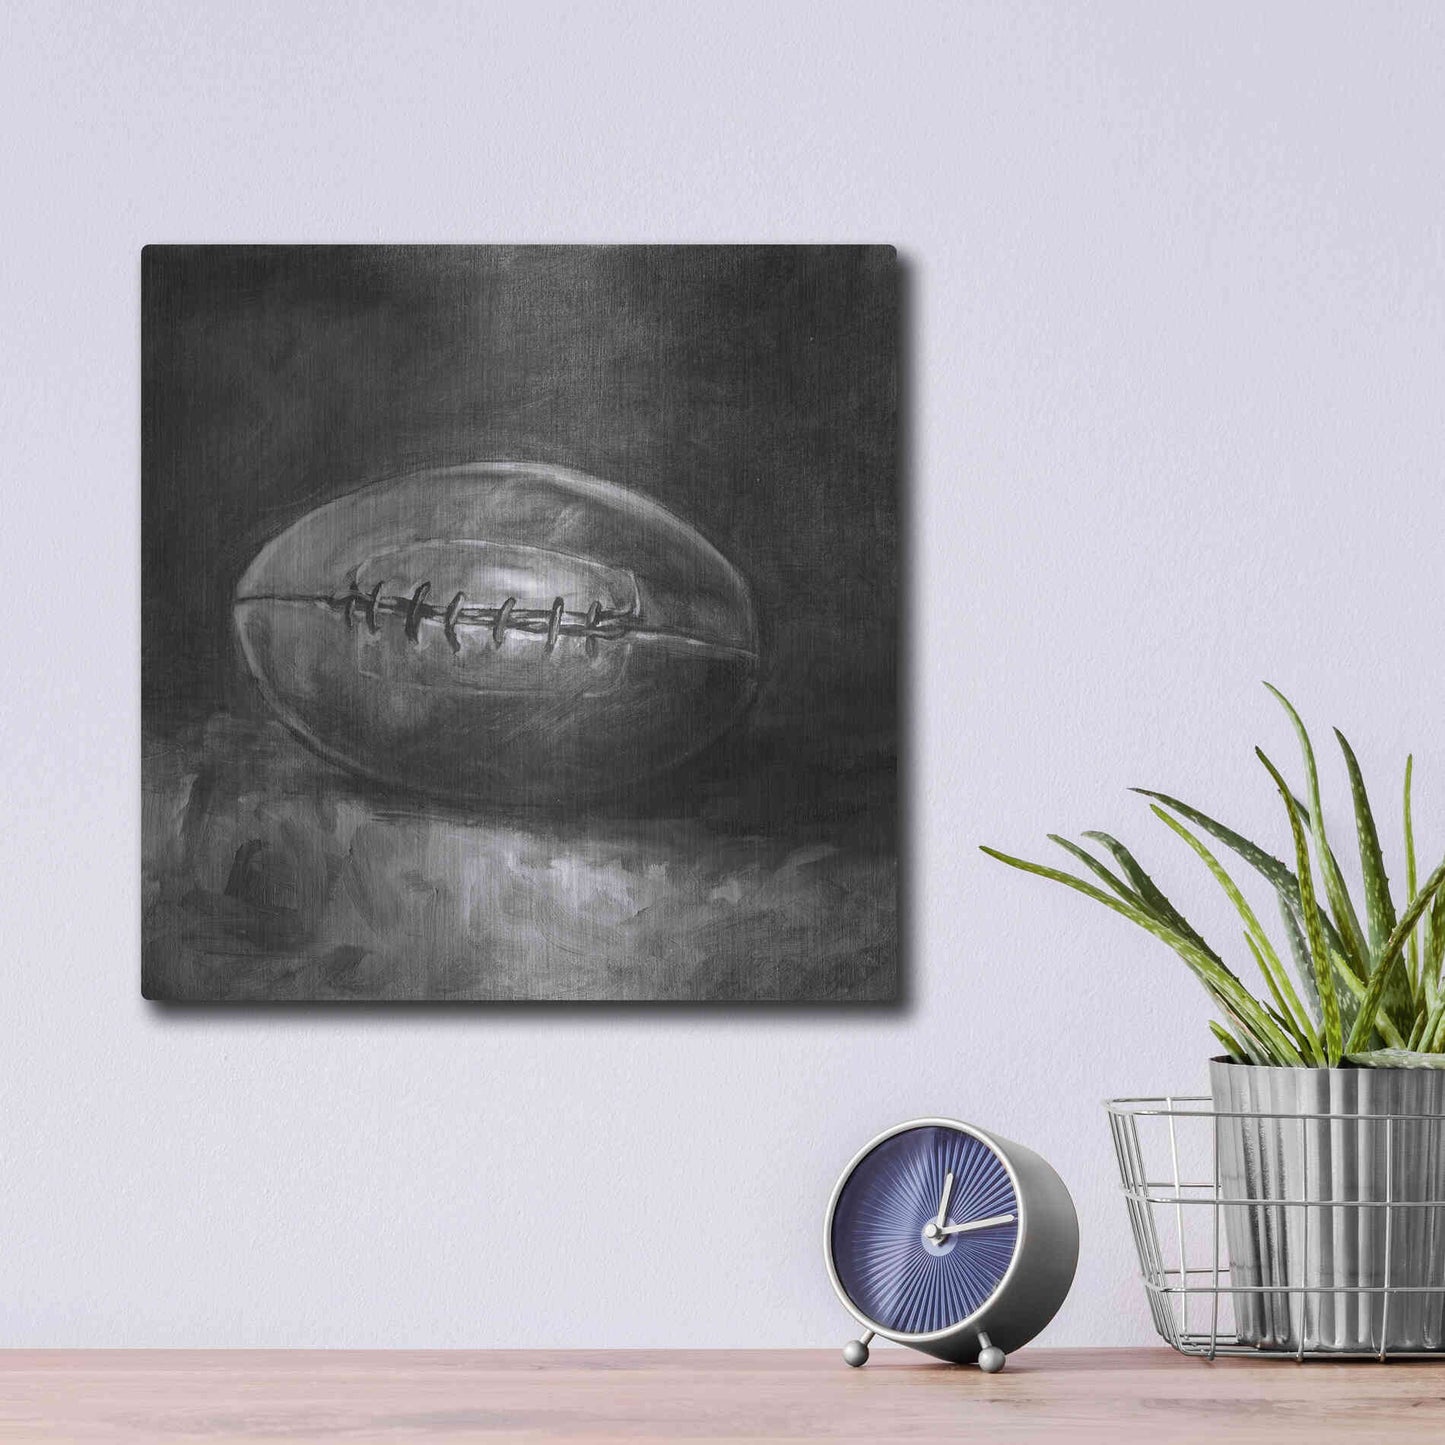 Luxe Metal Art 'Rustic Sports IV Black and White' by Ethan Harper, Metal Wall Art,12x12